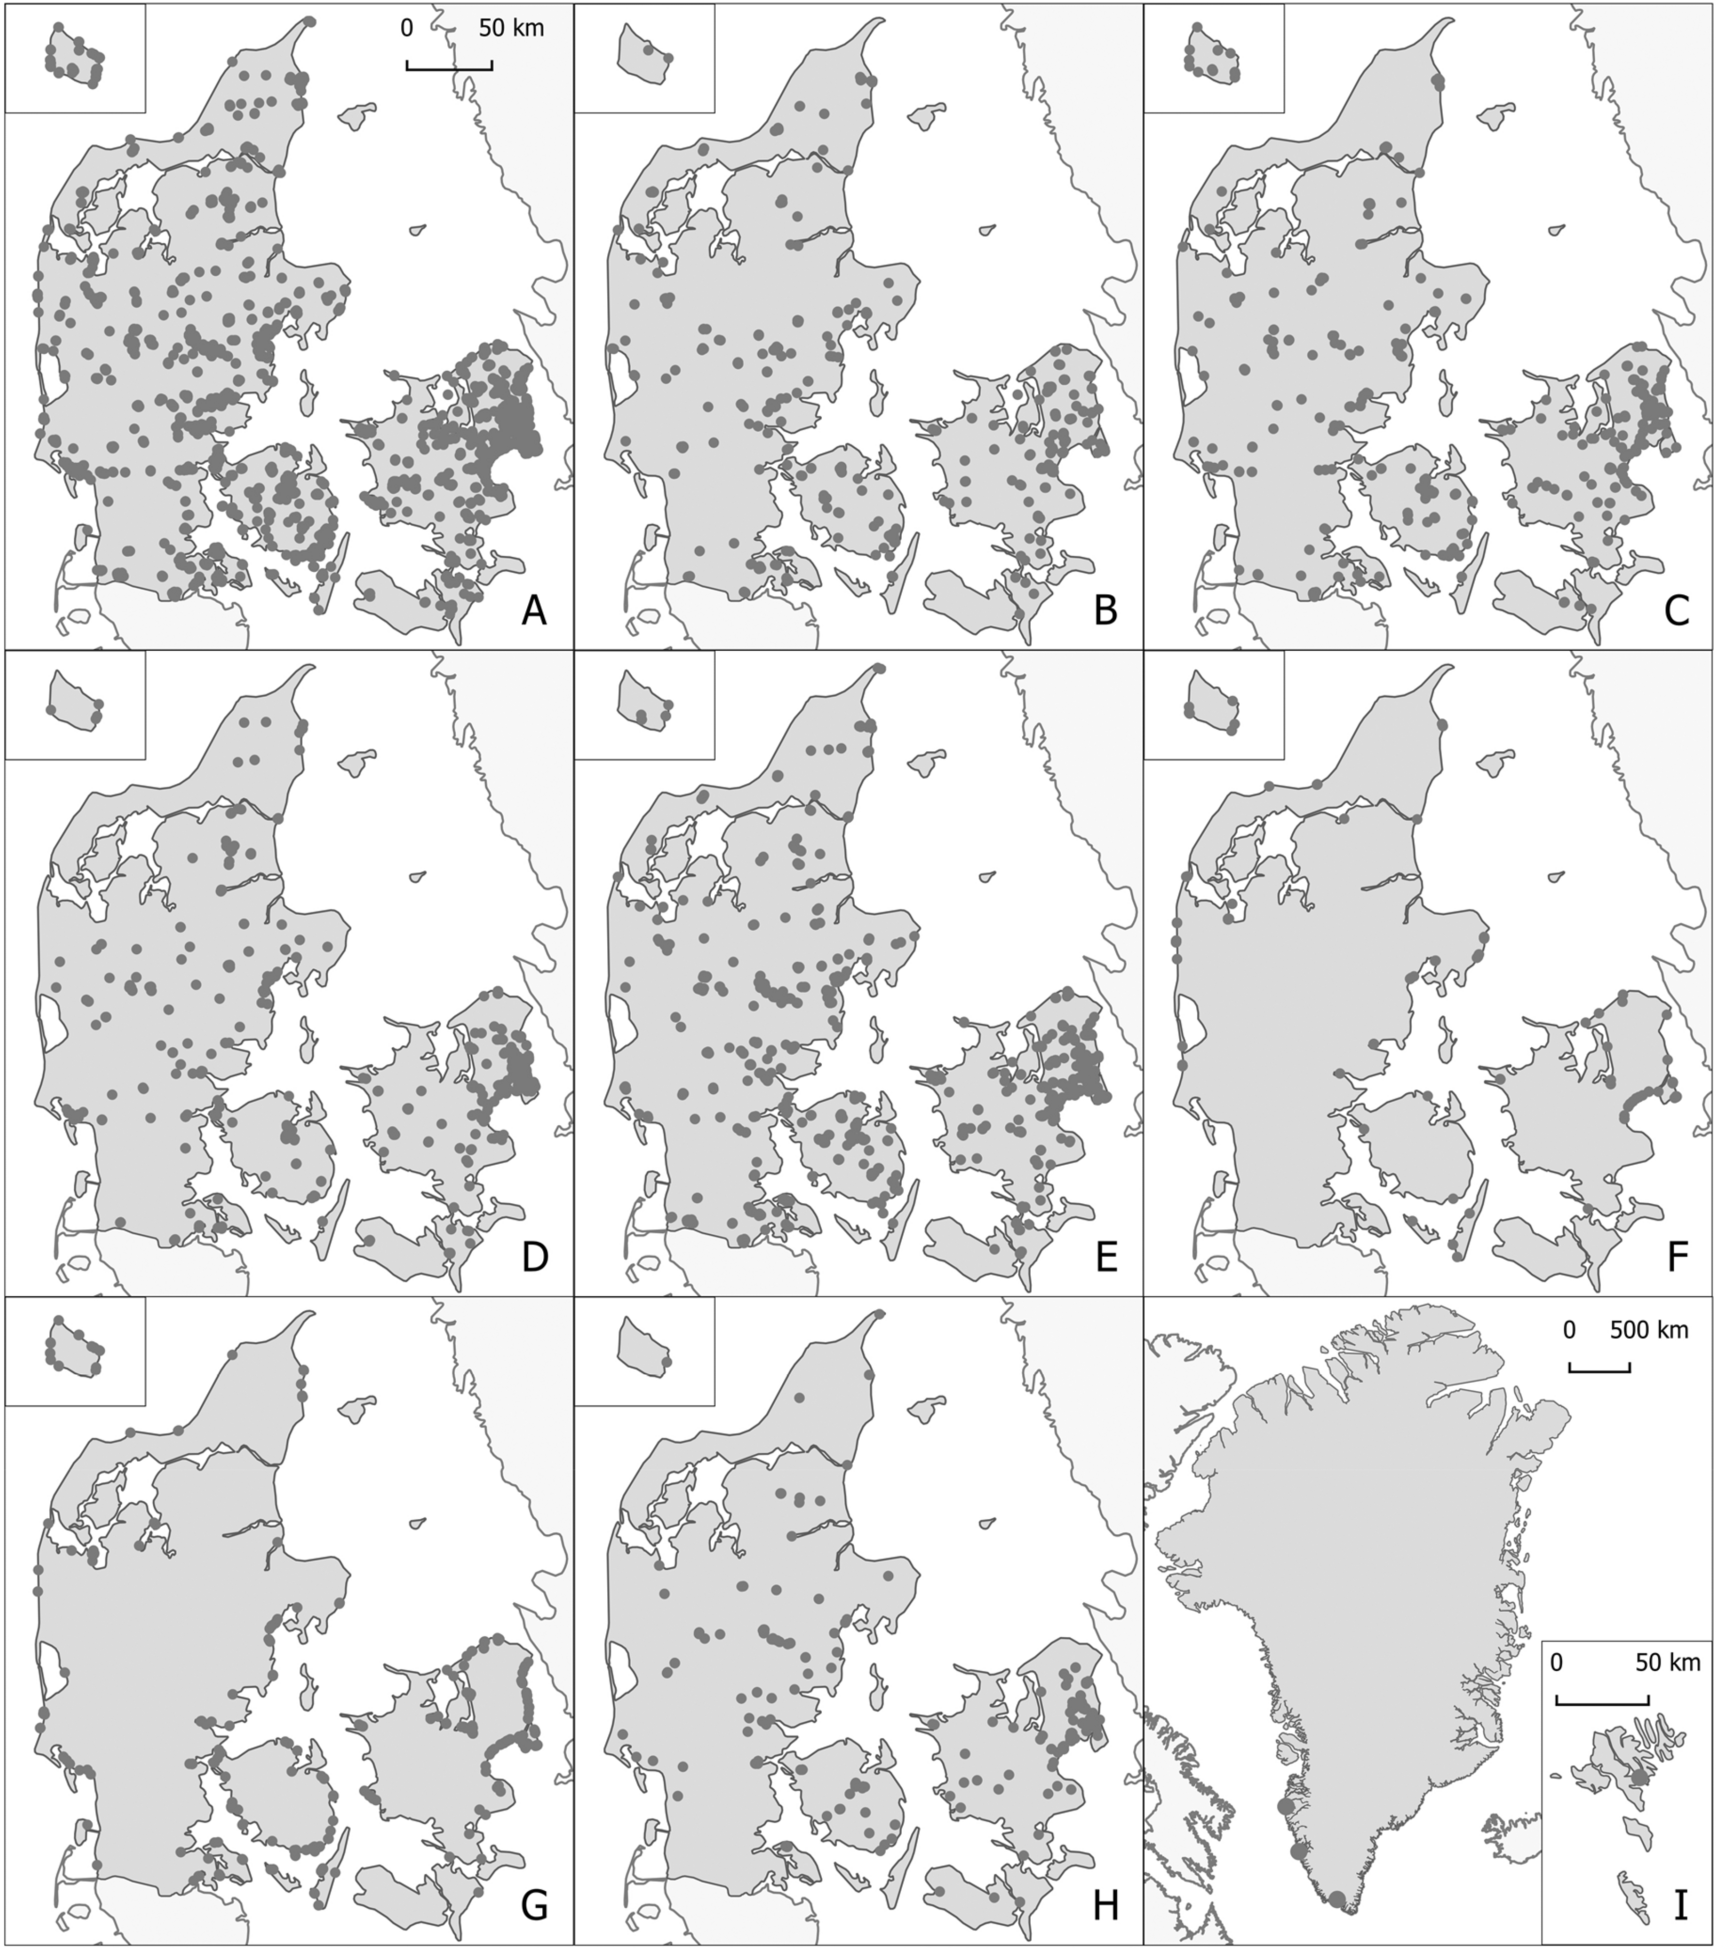 A nationwide assessment of pollution in the Danish using citizen science | Scientific Reports